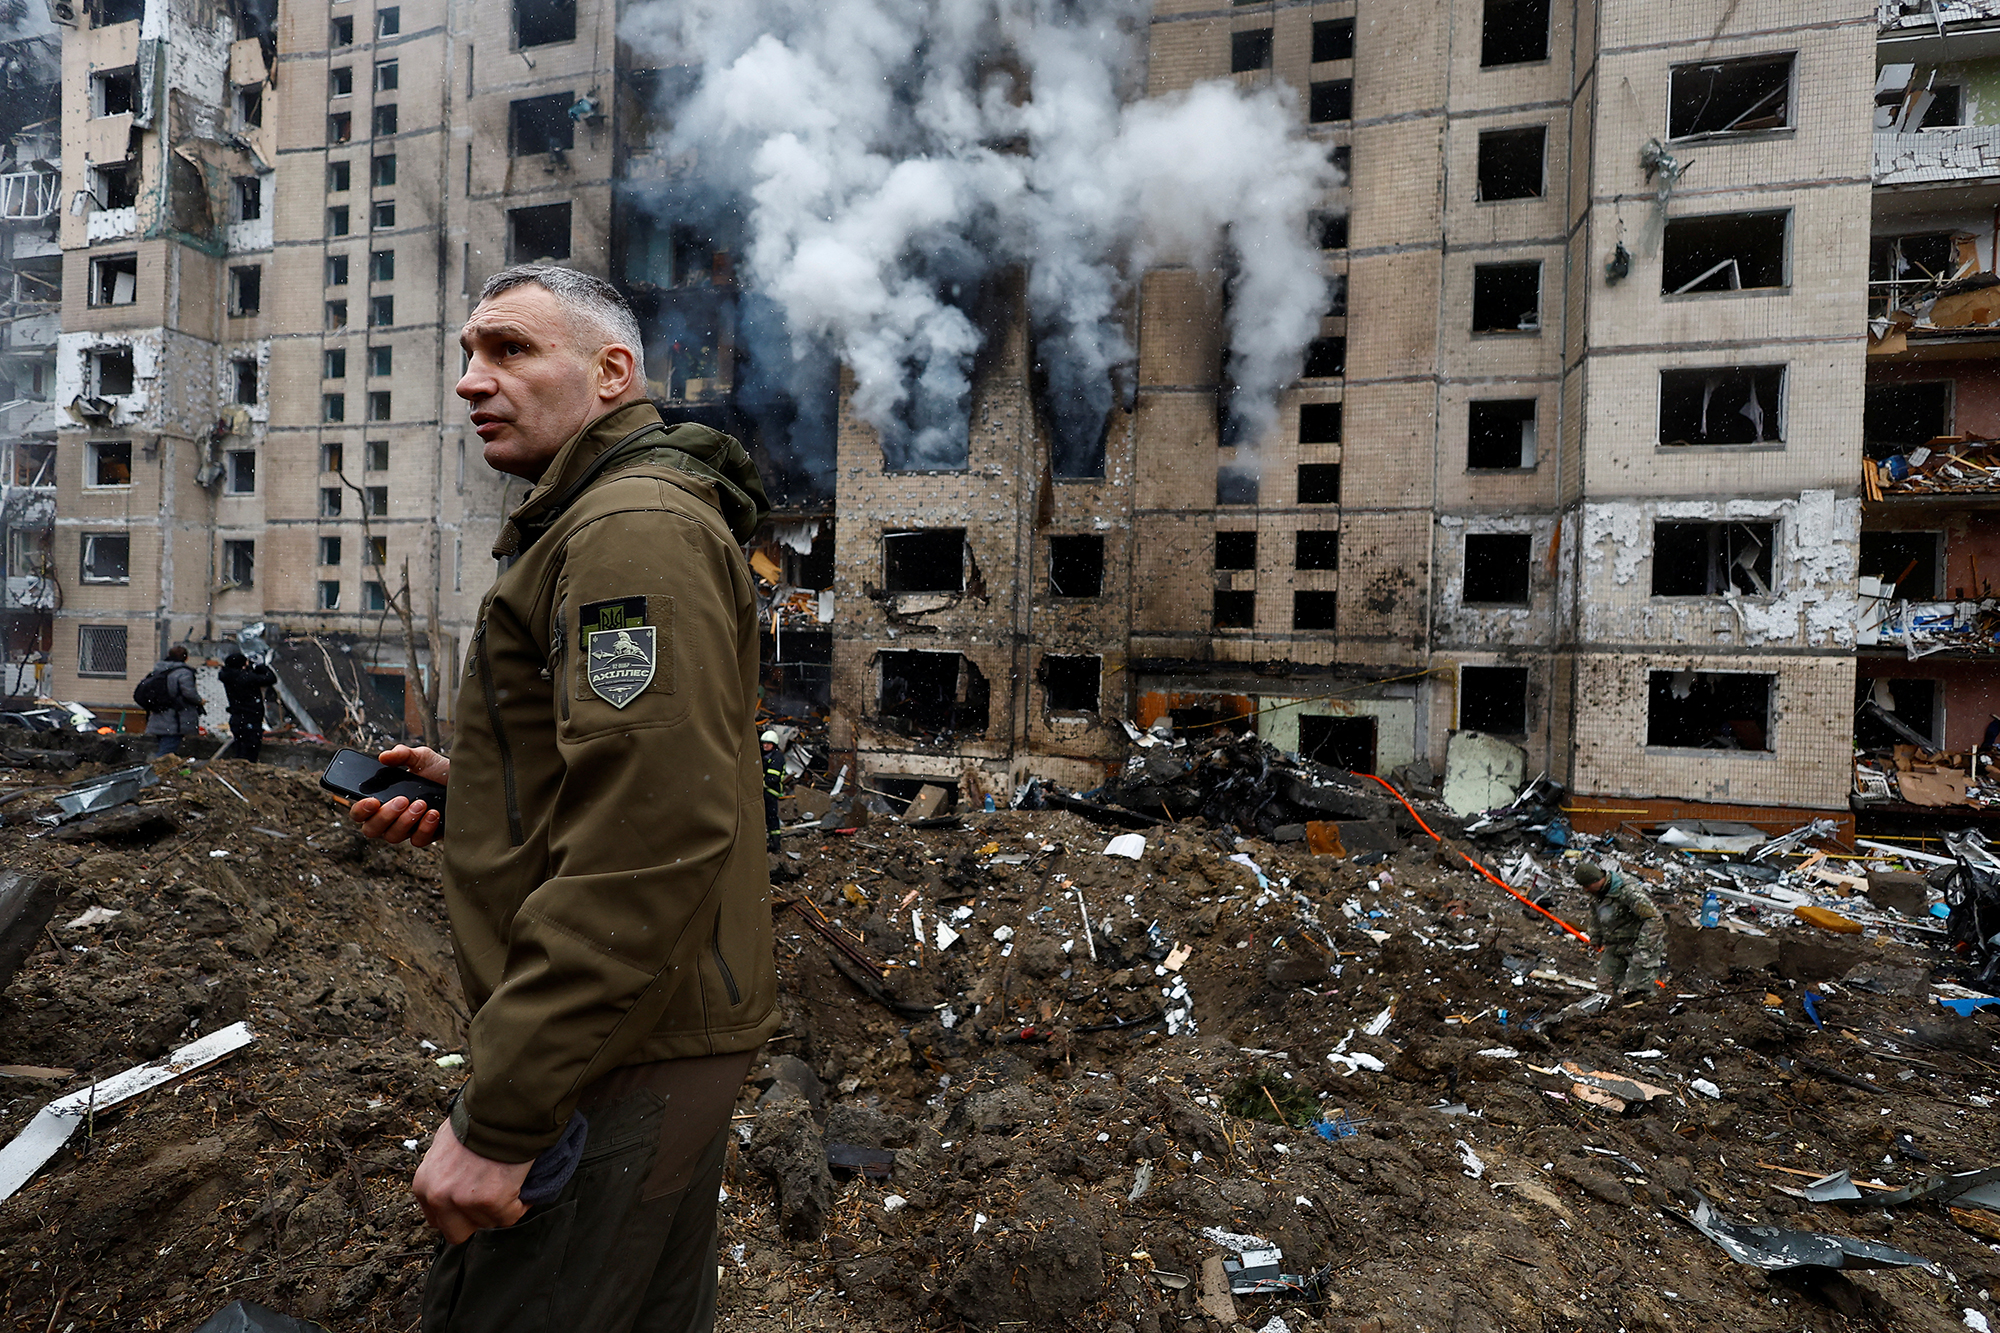 Kyiv Mayor Vitali Klitschko visits a residential building heavily damaged during a Russian missile attack in Kyiv, Ukraine, on January 2. 